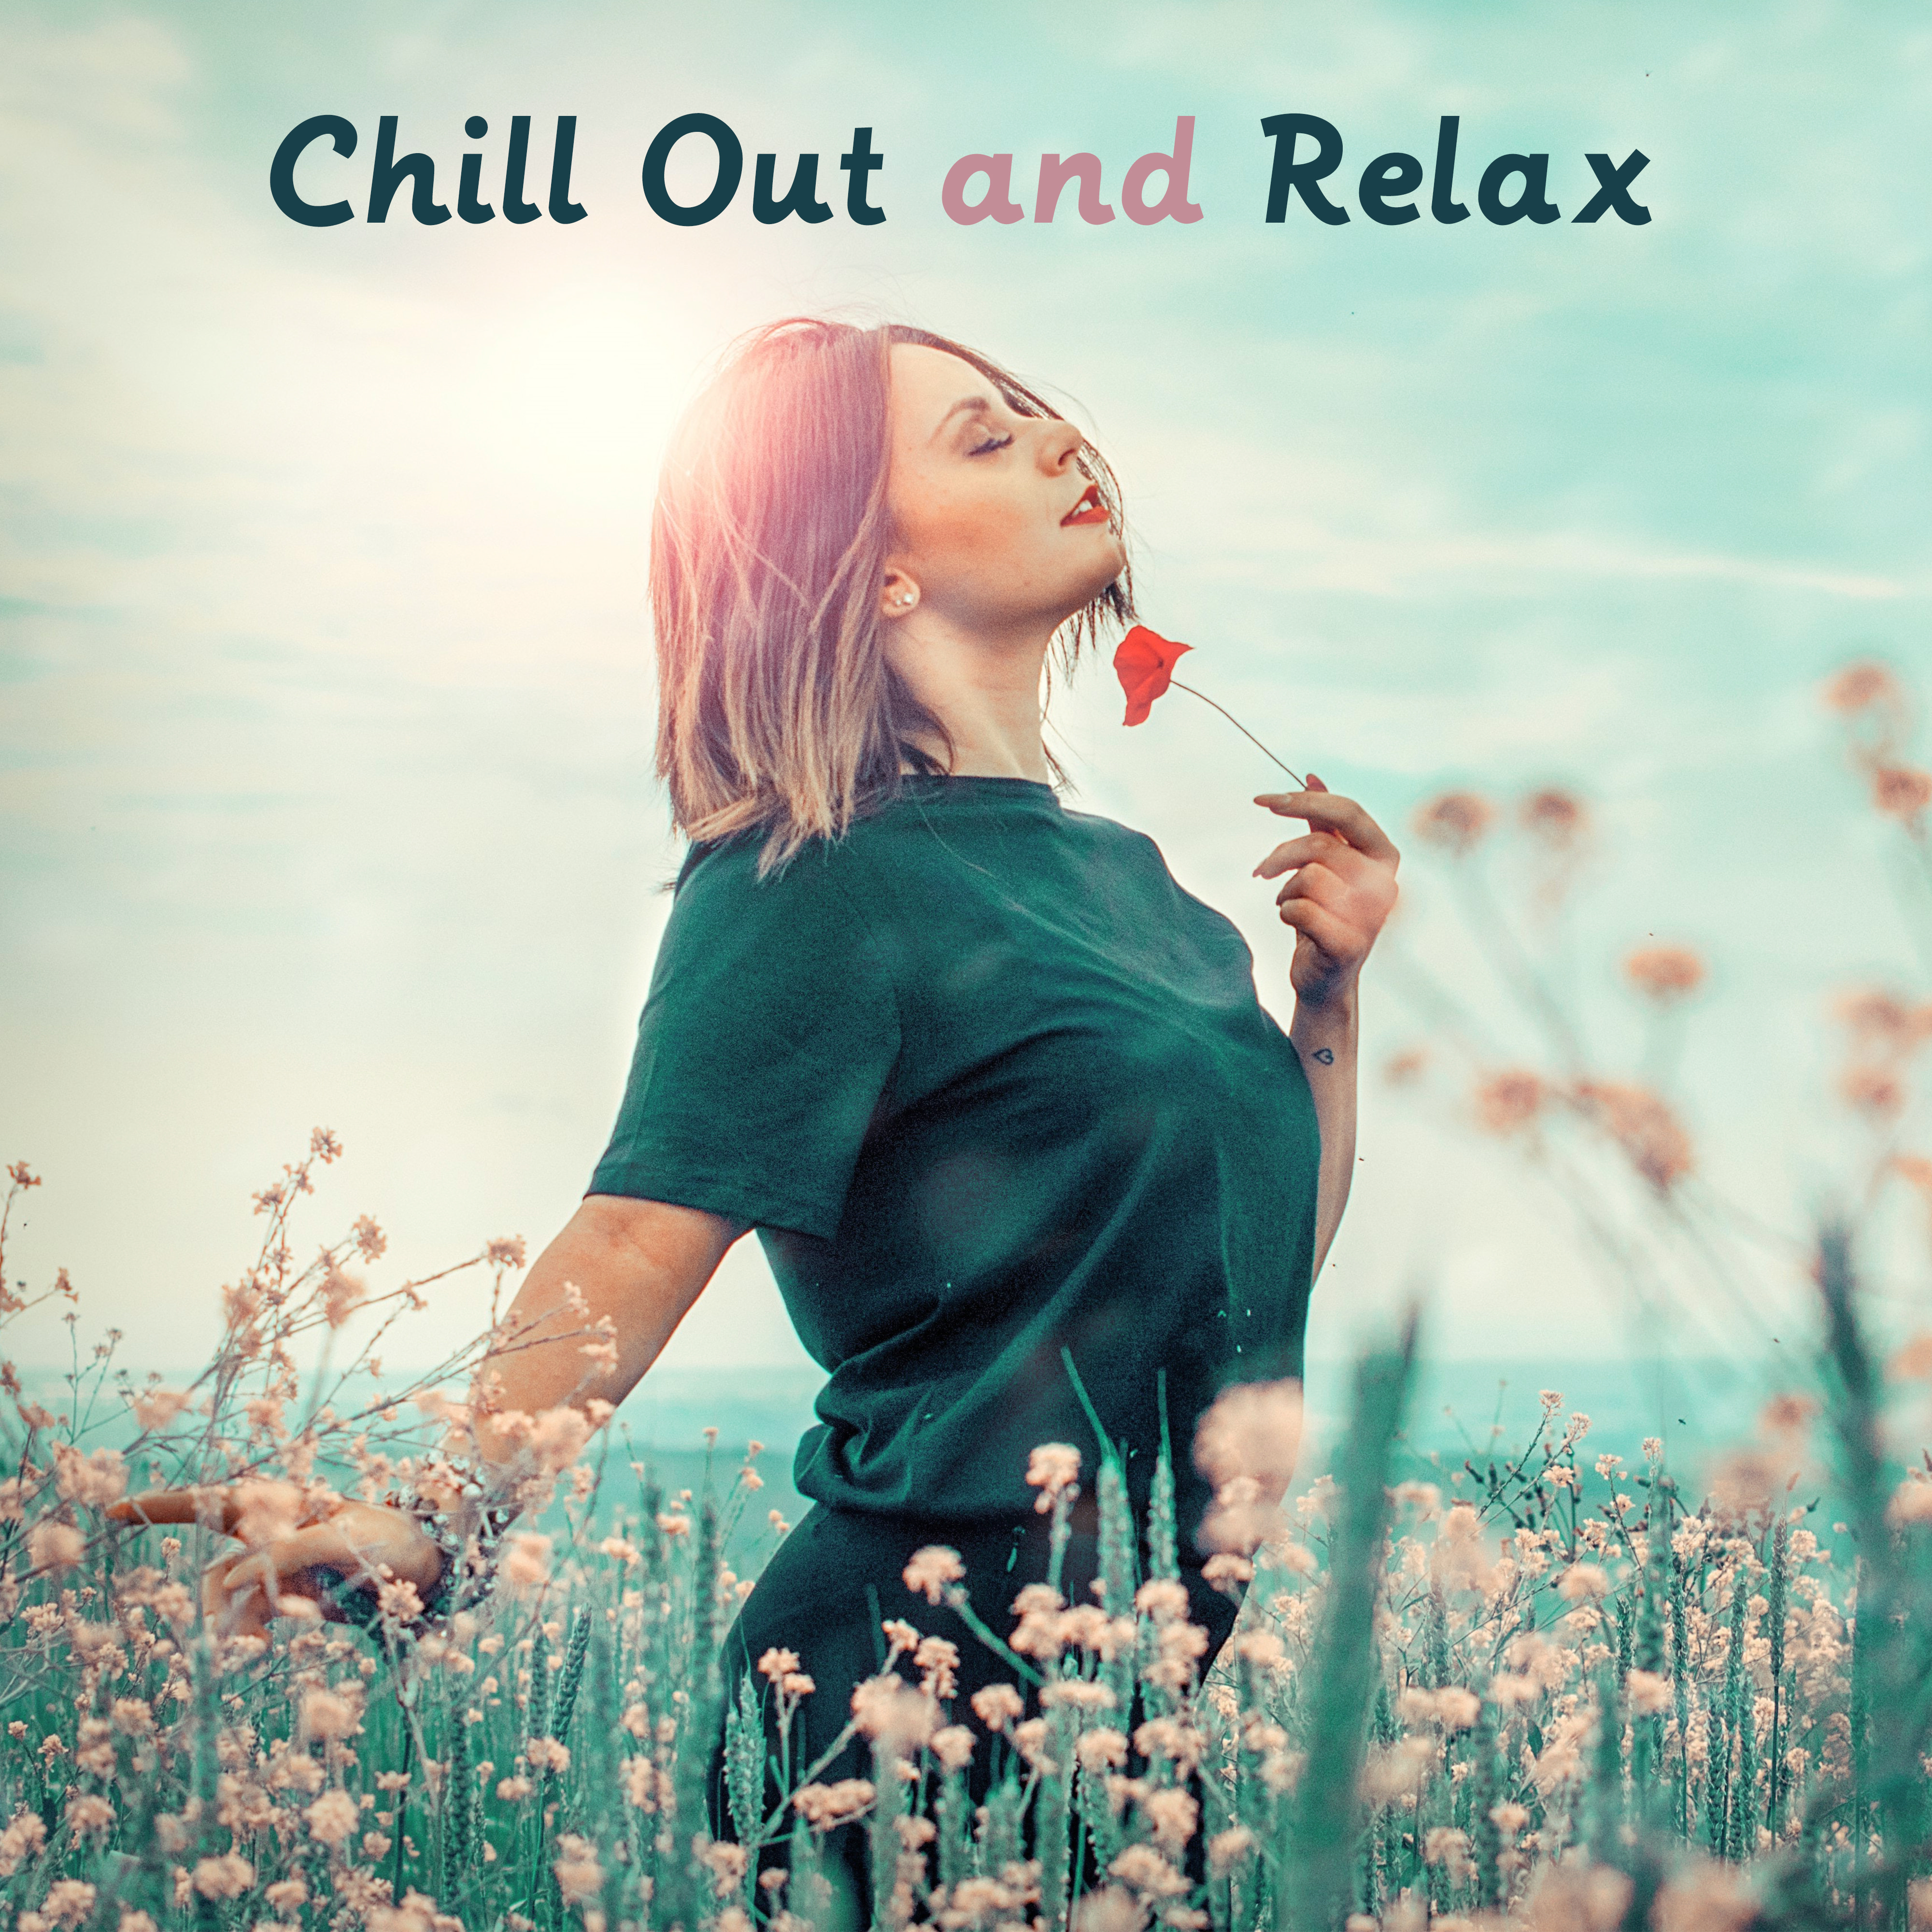 Chill Out and Relax